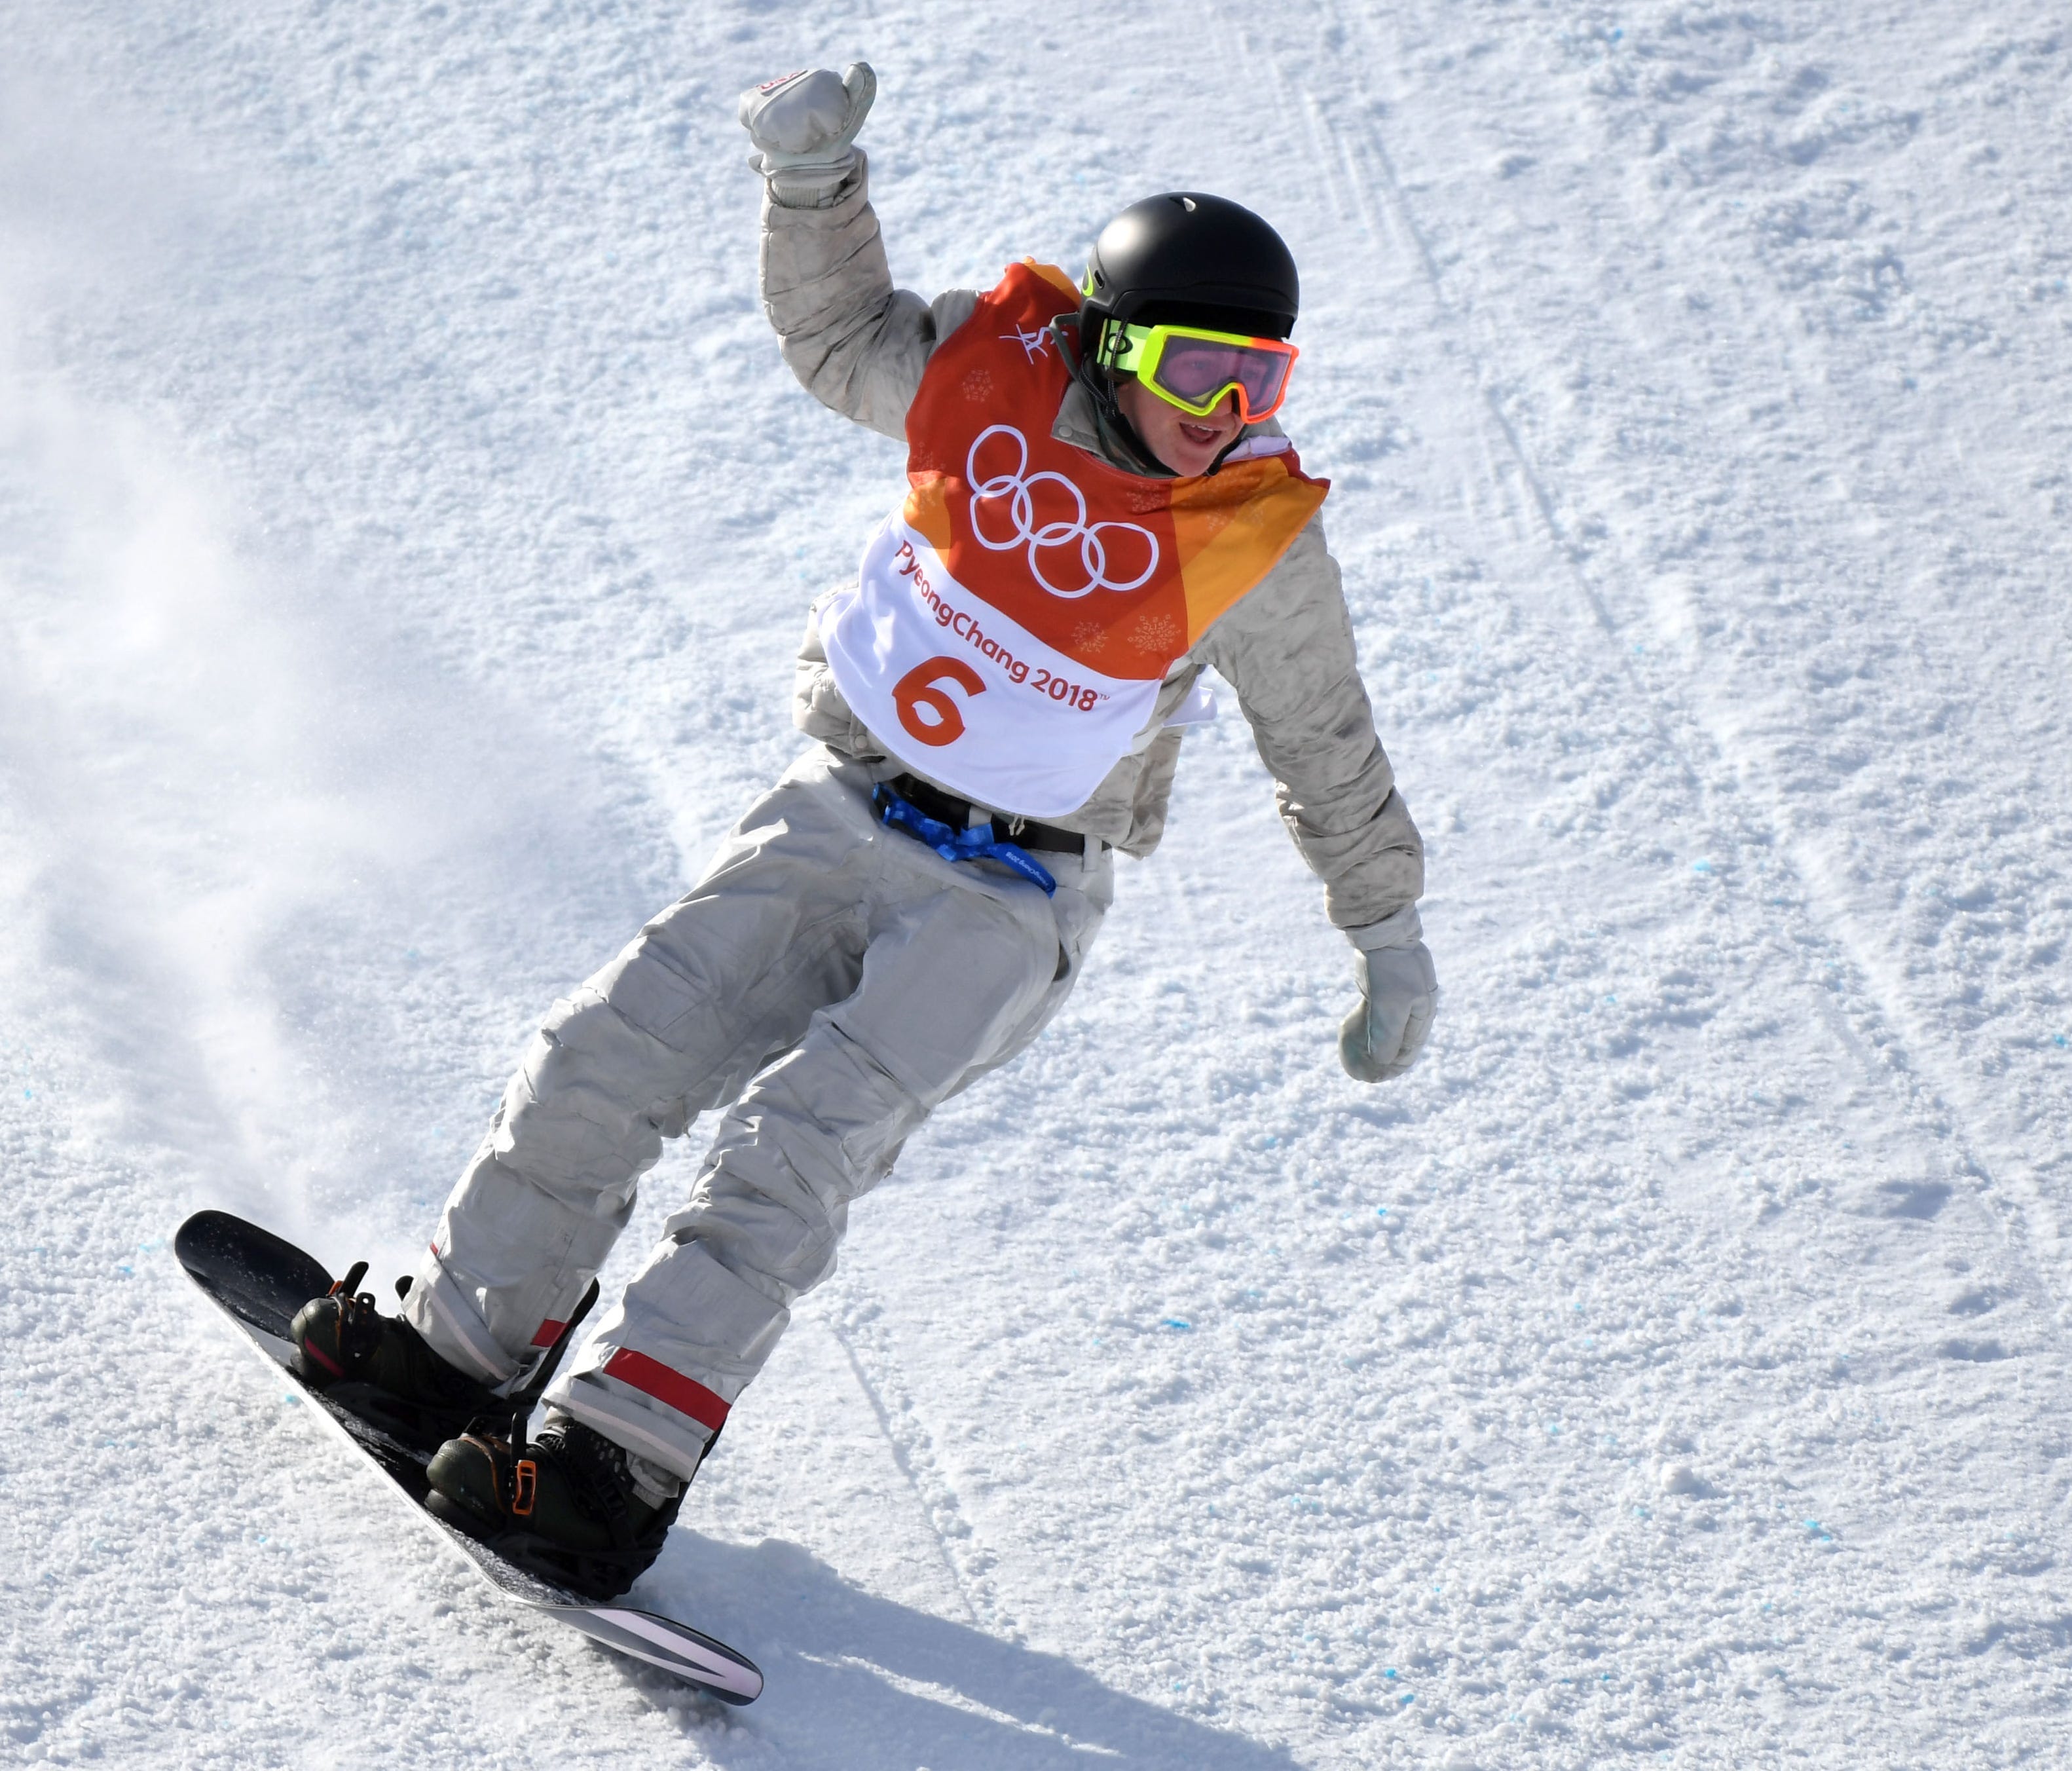 Red Gerard competes in the snowboard slopestyle during the Pyeongchang 2018 Olympic Winter Games at Phoenix Snow Park.